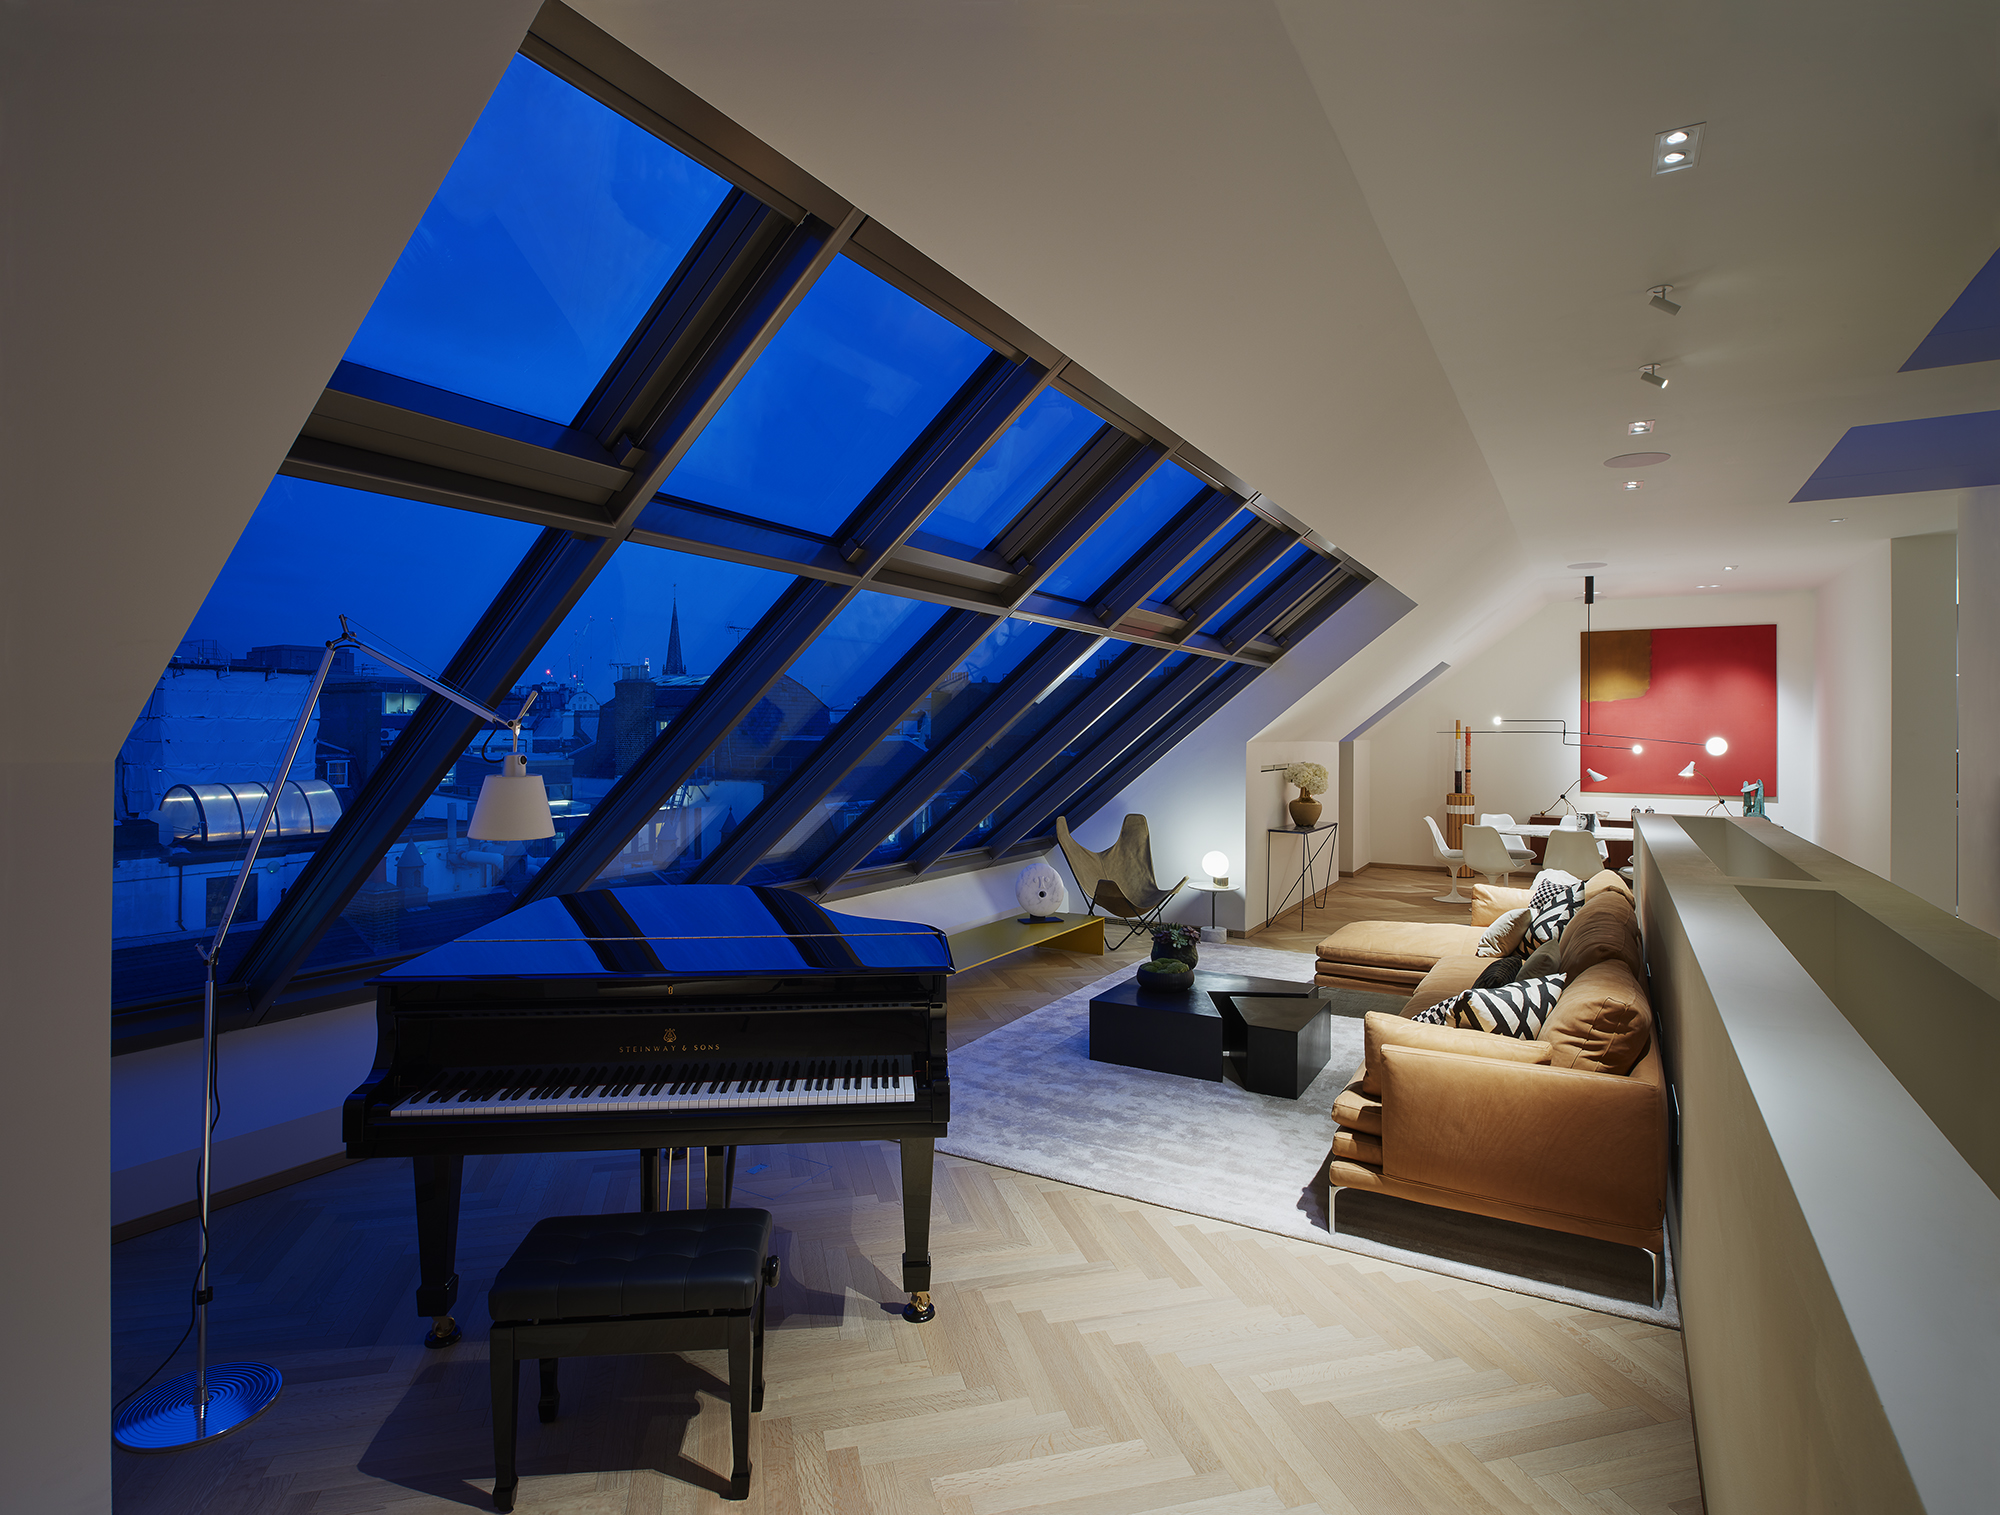 A Steinway piano in the music room of the penthouse.